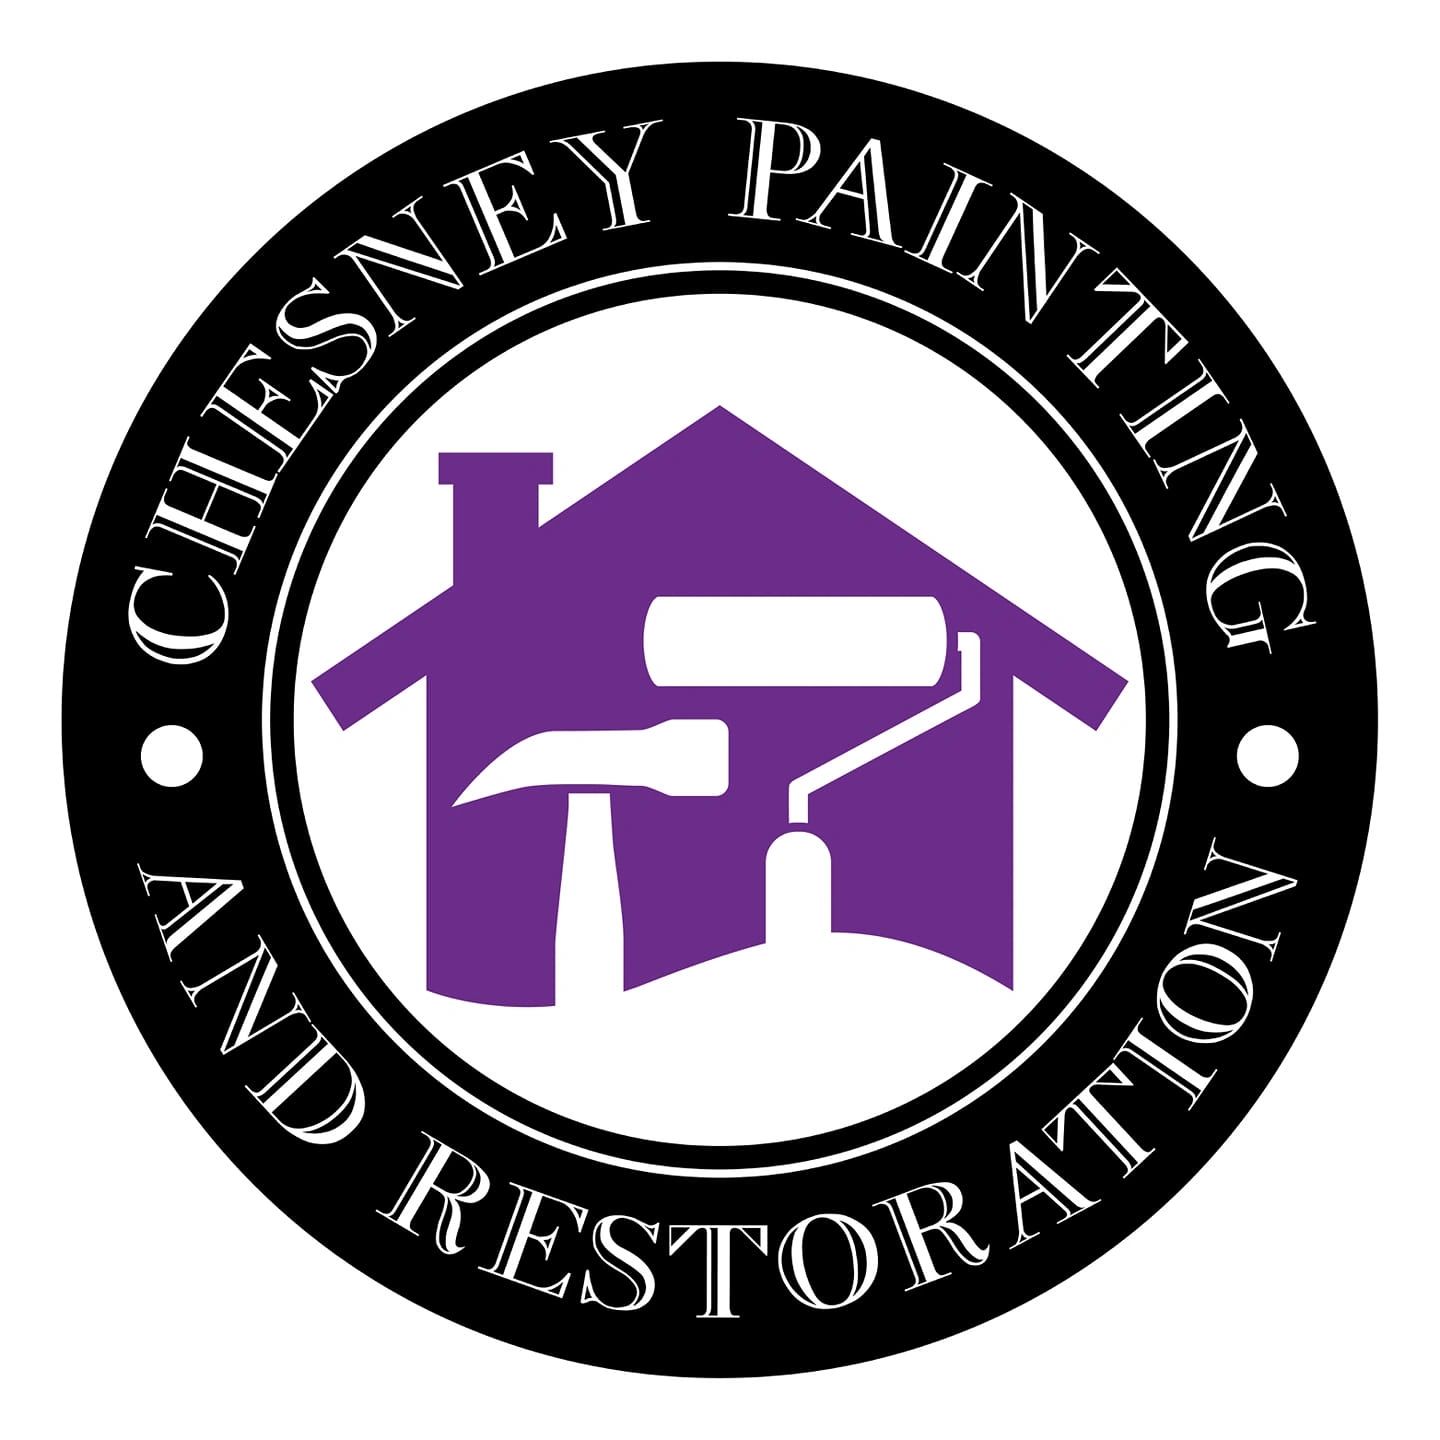 Chesney Painting And Restoration - Painter, Cabinets, Drywalling, Power ...